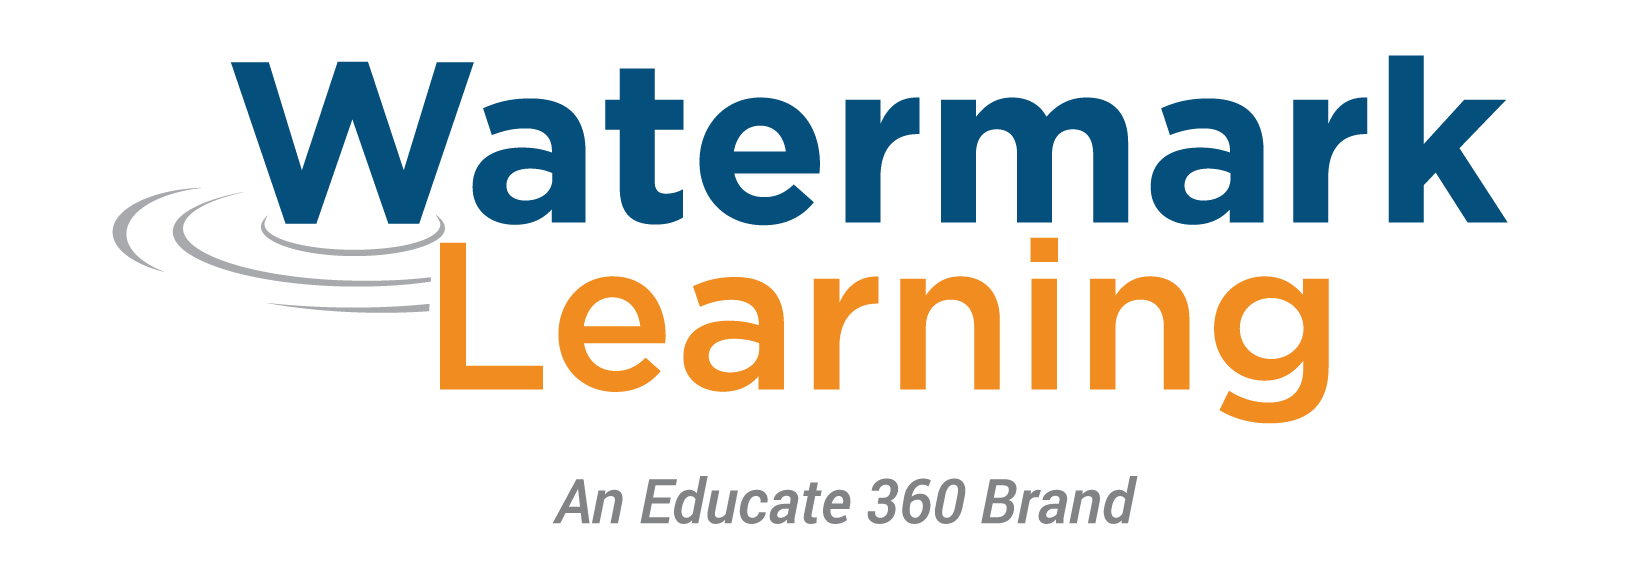 watermark-learning-2023.png